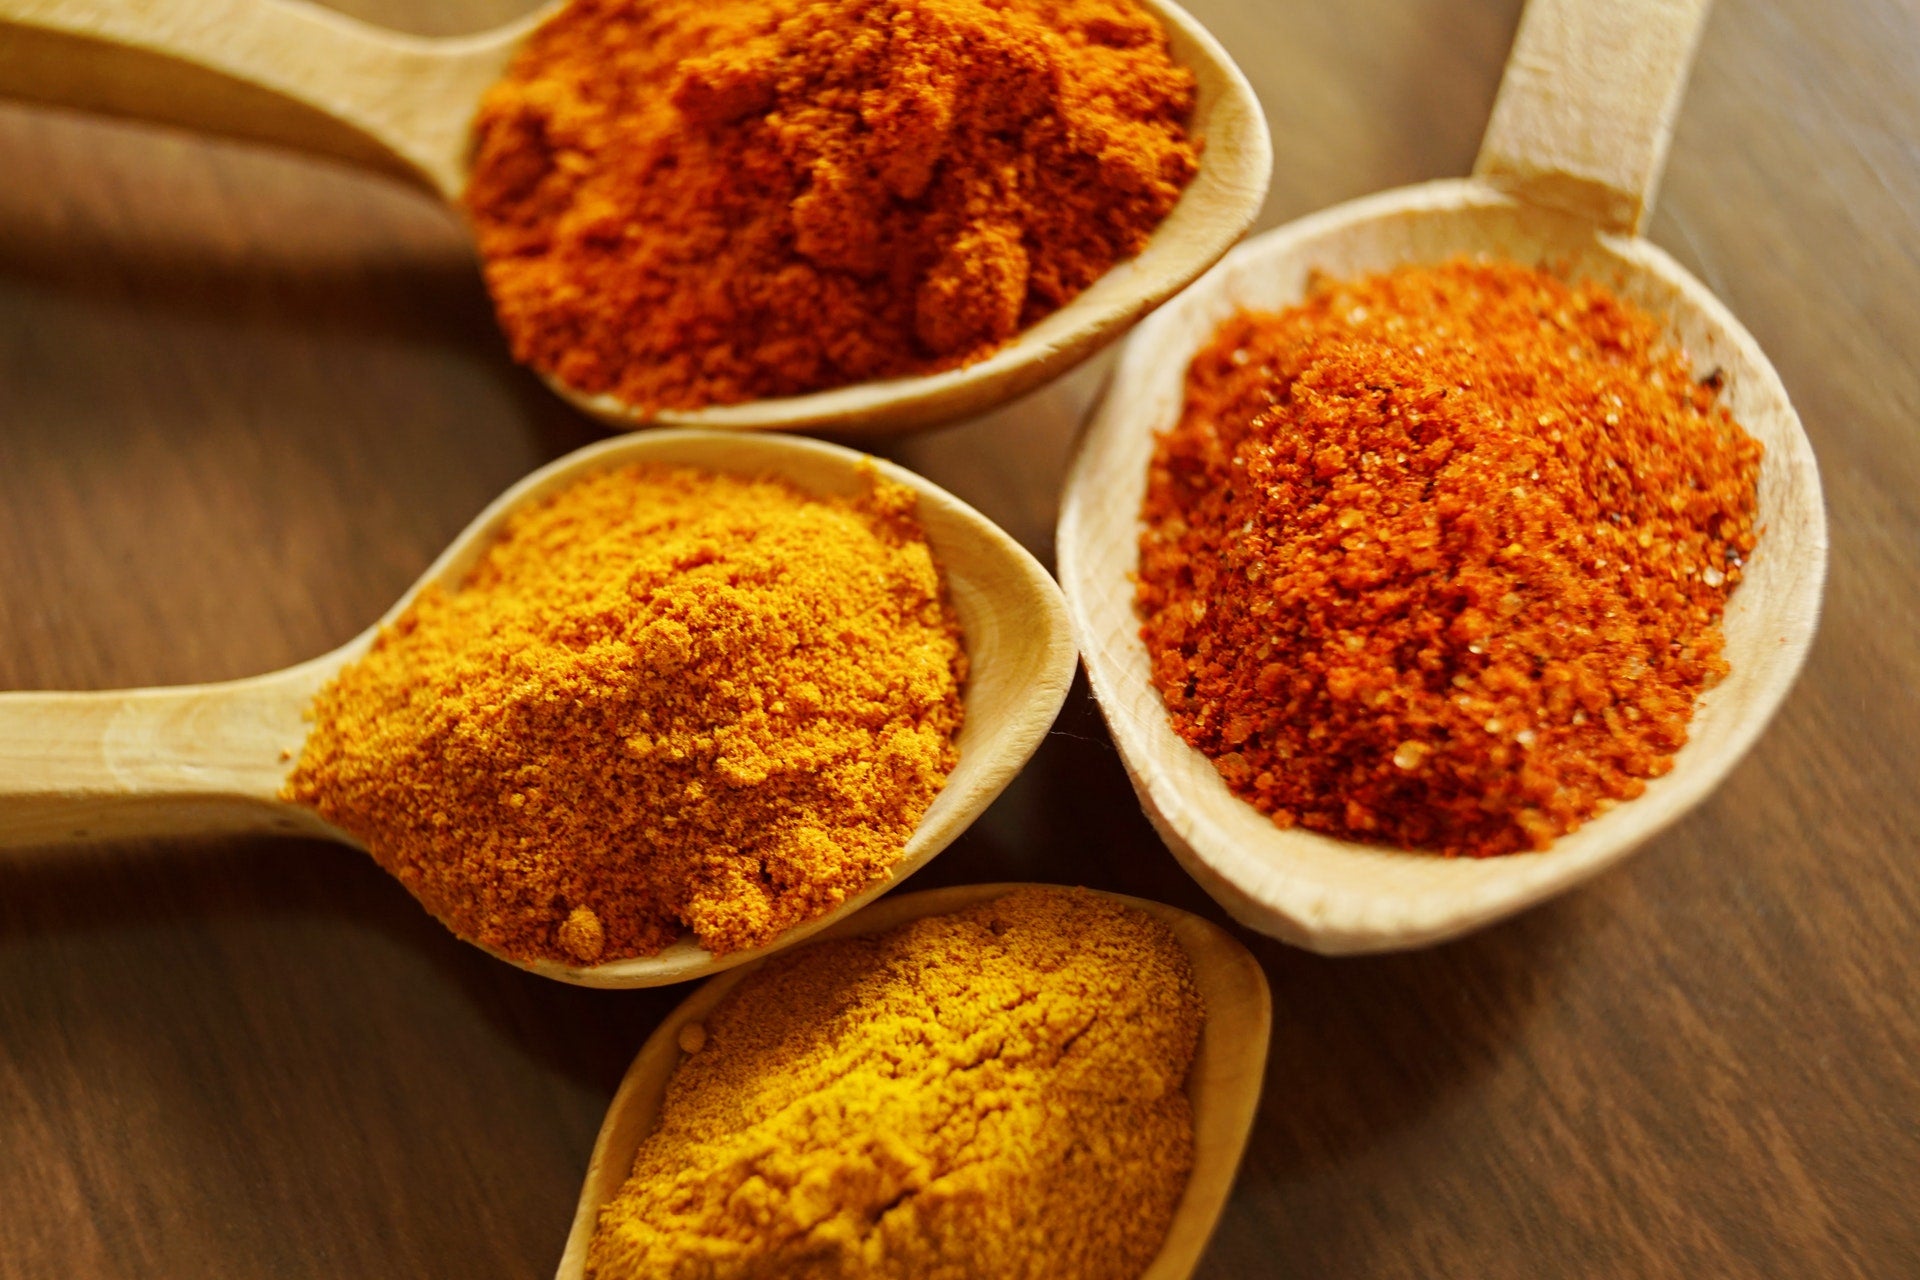 Tumeric-and-spices-on-spoons